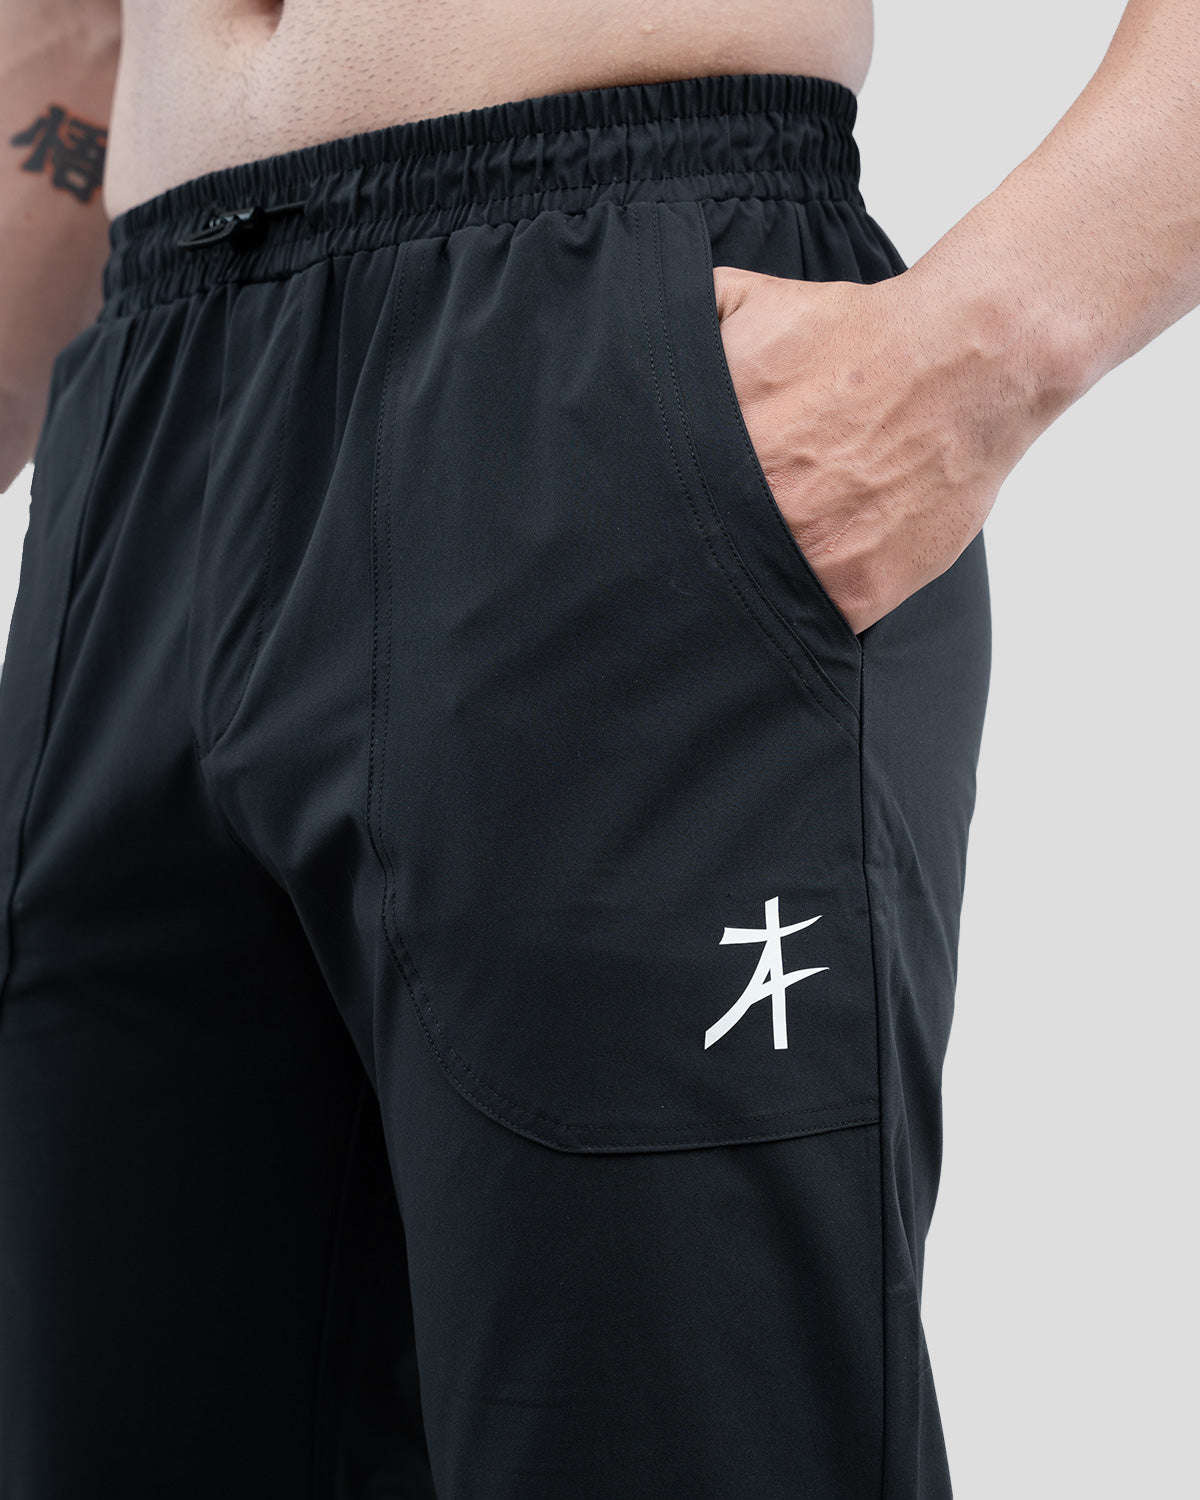 Daily Joggers (Black)